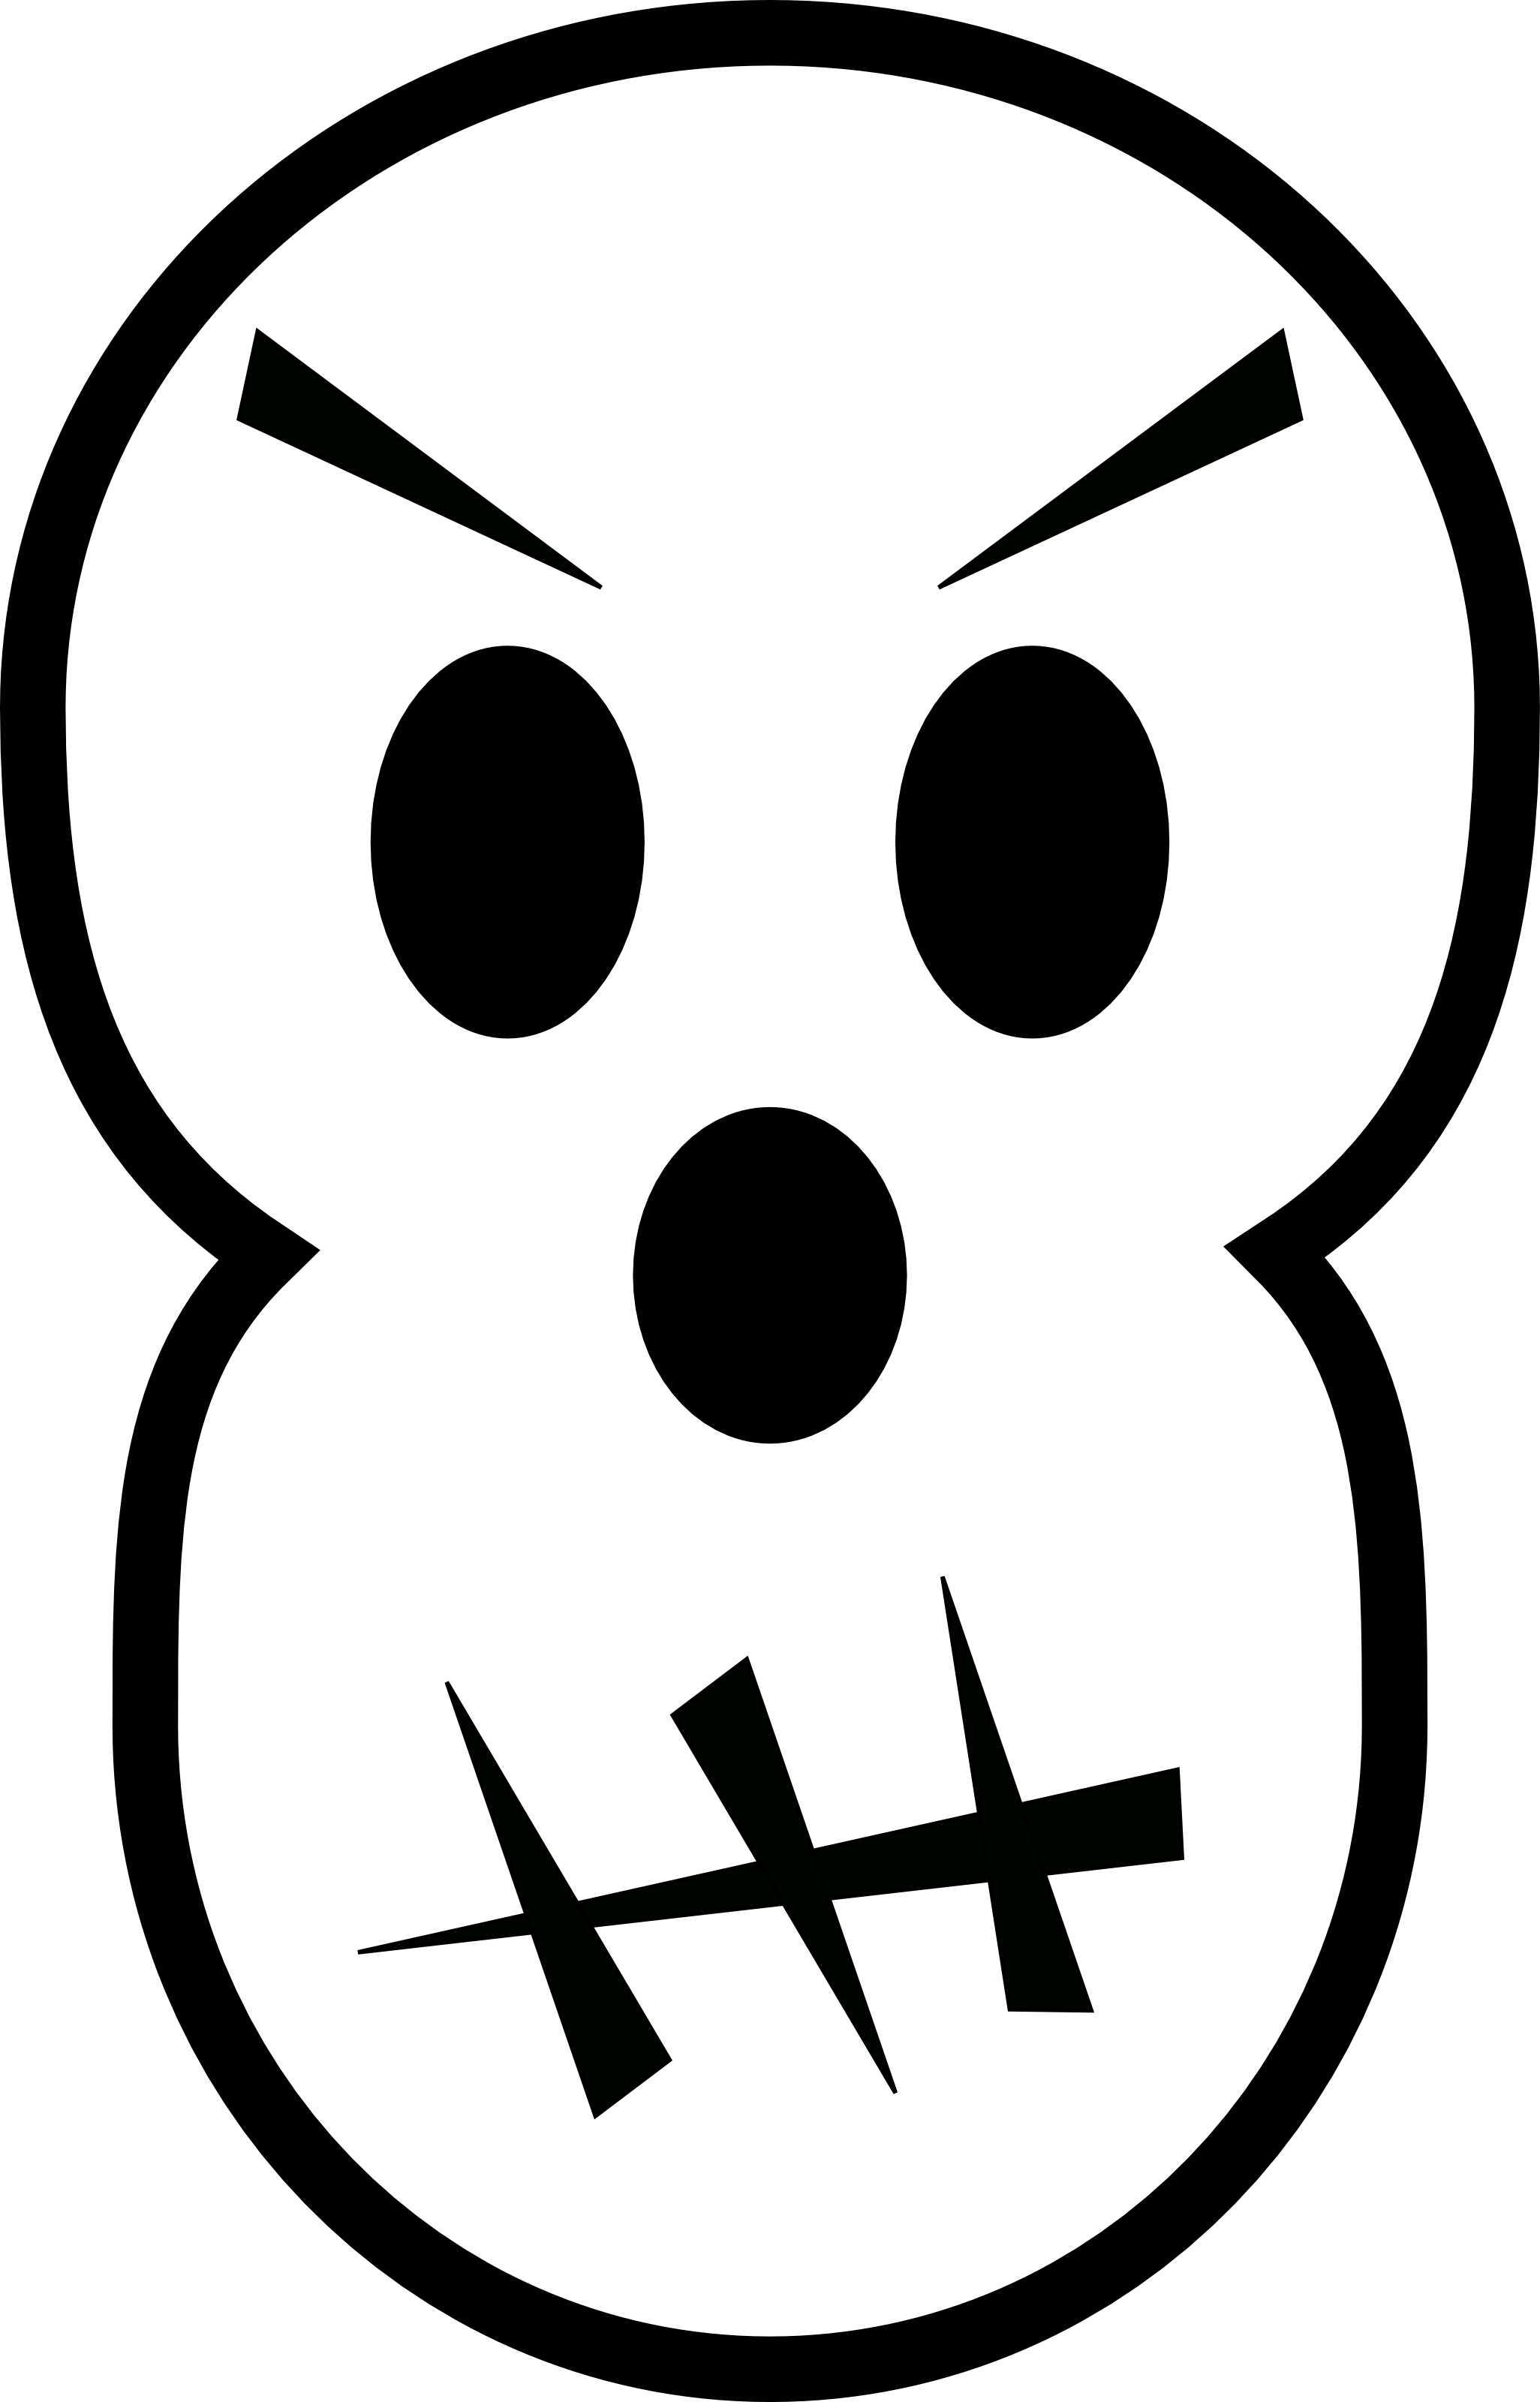 Dog Face Clipart Black And White | Clipart Panda - Free Clipart Images